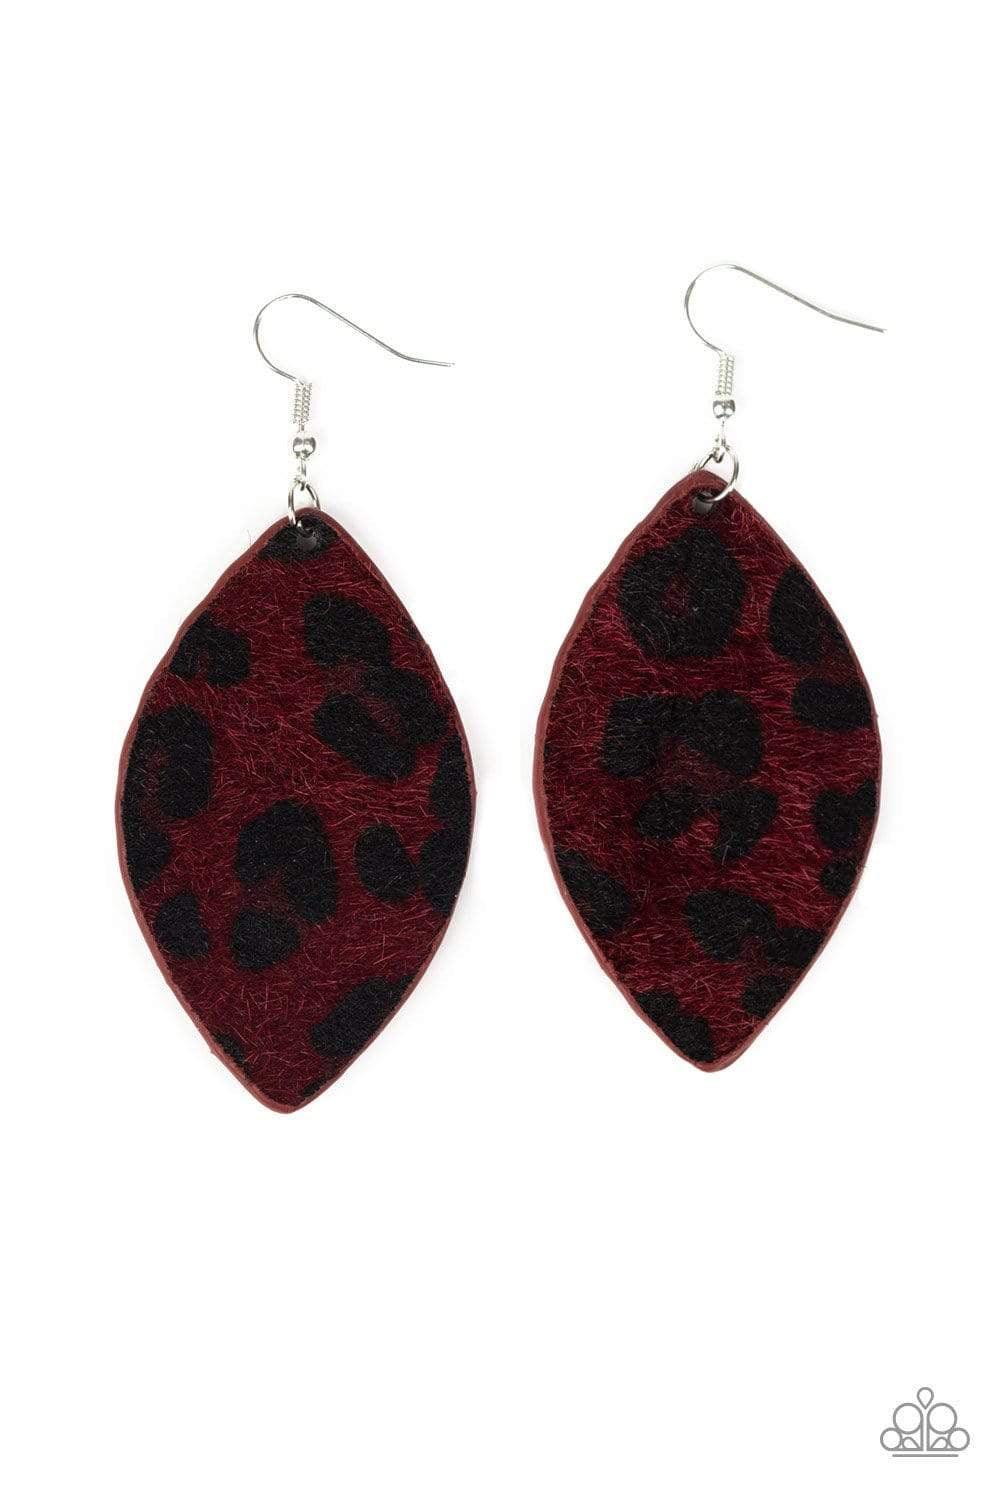 Paparazzi Accessories GRR-irl Power - Red Featuring black cheetah print, a fuzzy red almond-shaped frame swings from the ear for a wild look. Earring attaches to a standard fishhook fitting. Sold as one pair of earrings. Jewelry